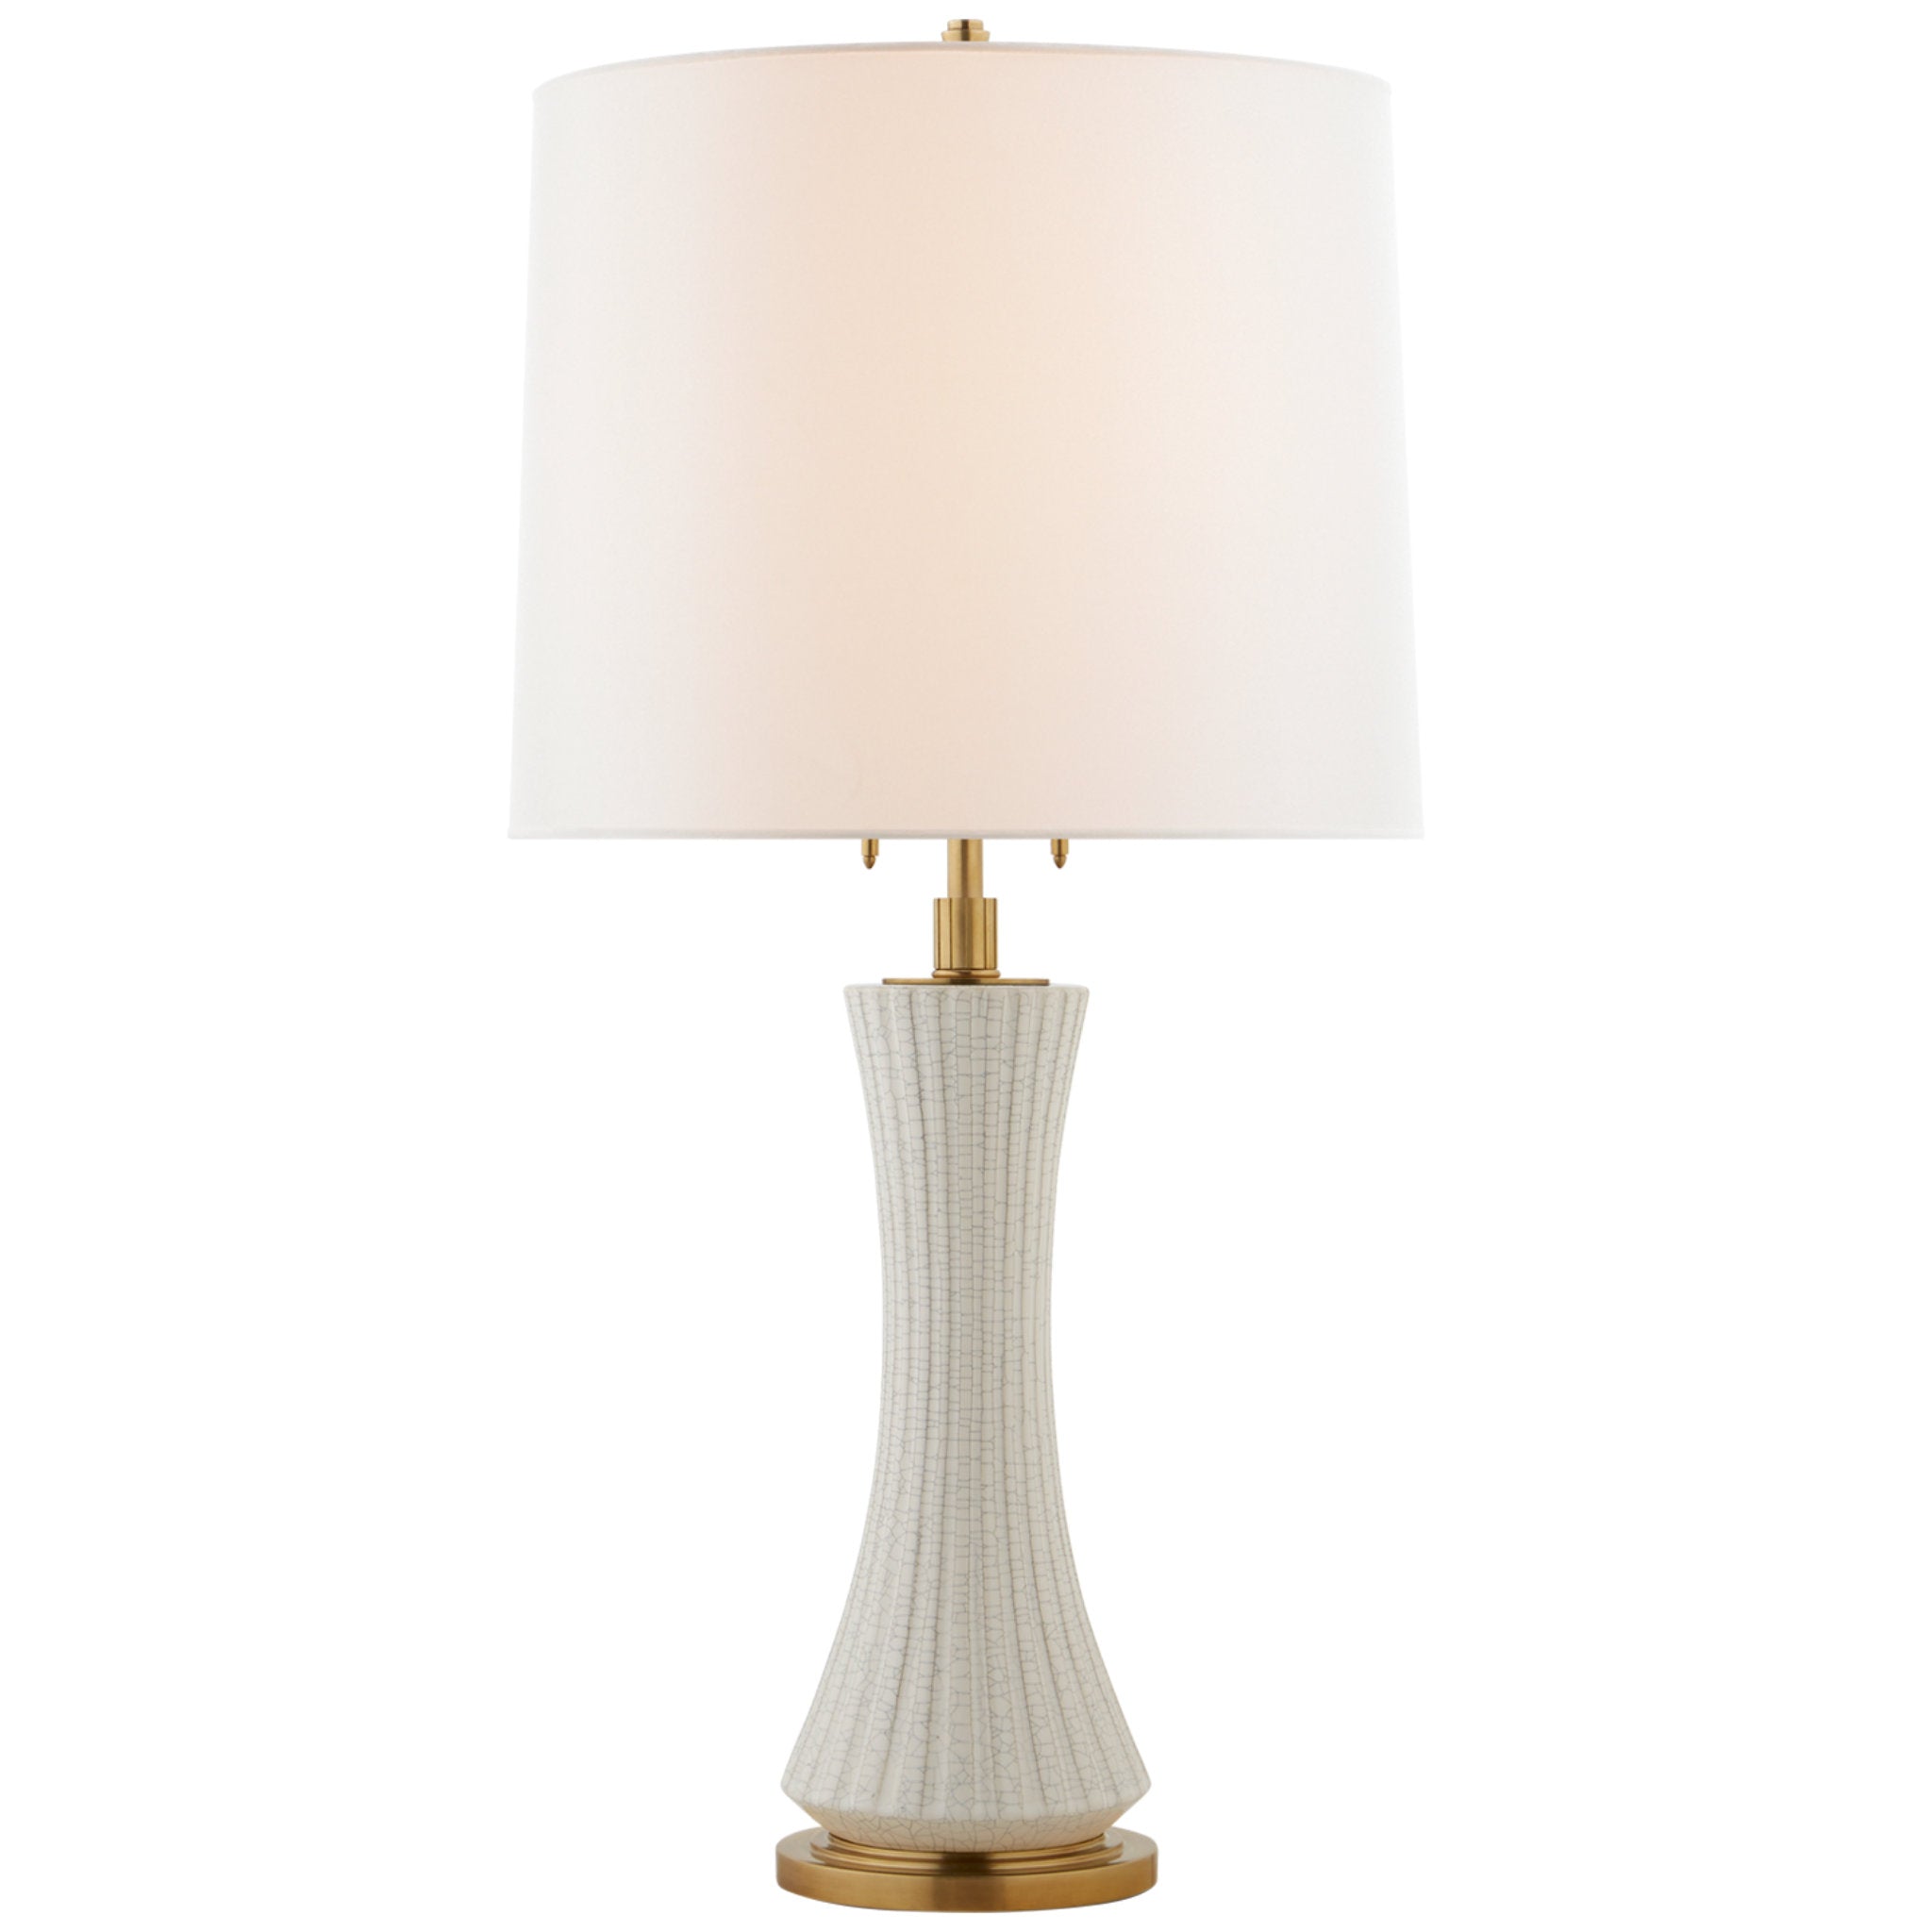 Thomas O'Brien Elena Large Table Lamp in White Crackle with Linen Shade